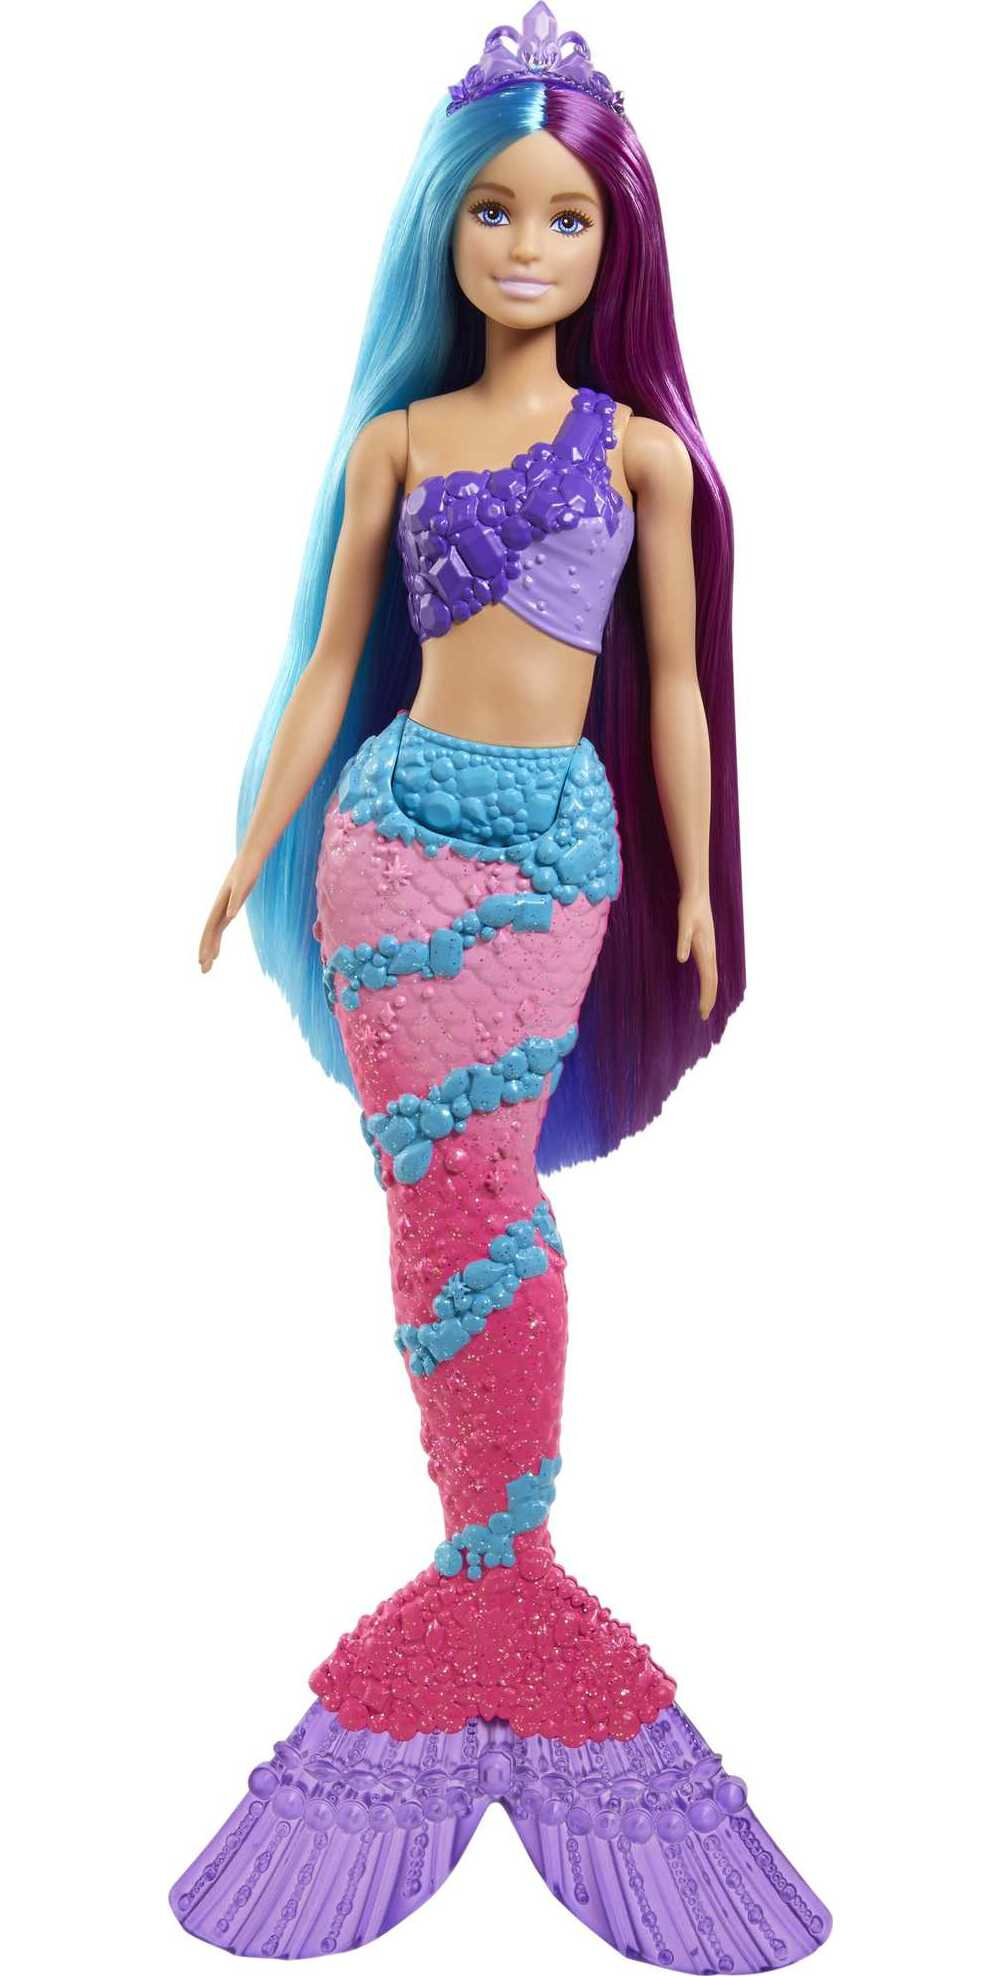 Barbie Dreamtopia Mermaid Doll with Extra-Long Fantasy Hair and Styling Accessories - image 1 of 6